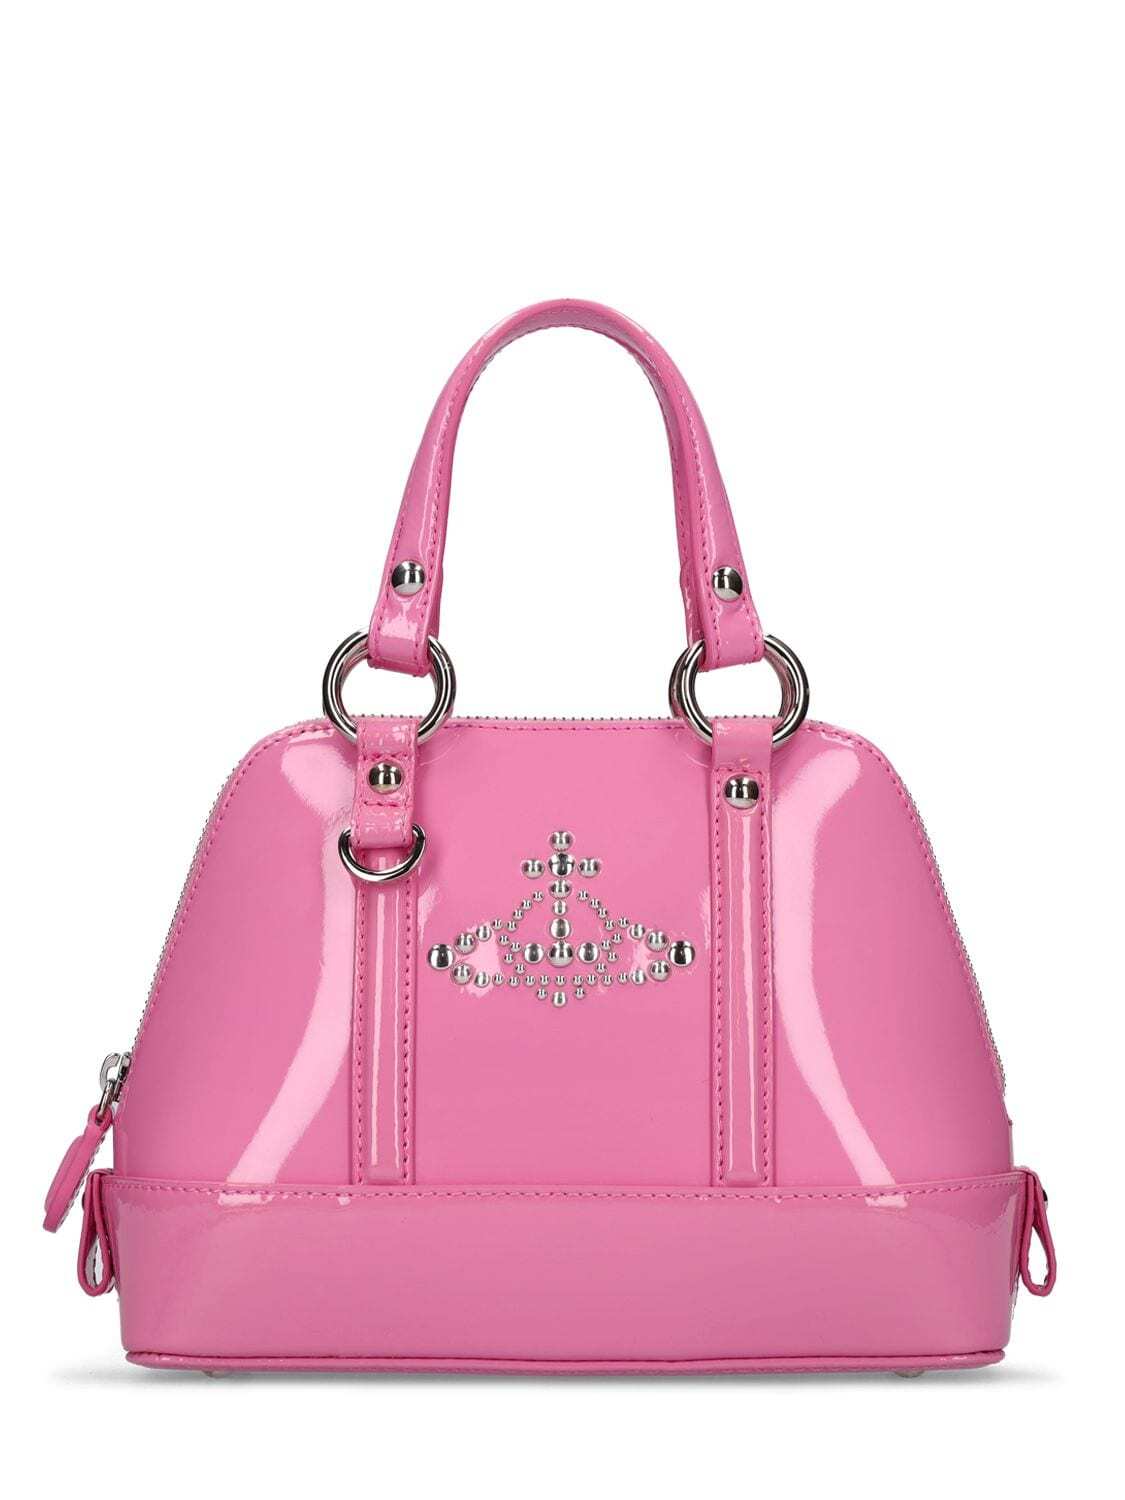 VIVIENNE WESTWOOD Small Jordan Patent Leather Bag in pink